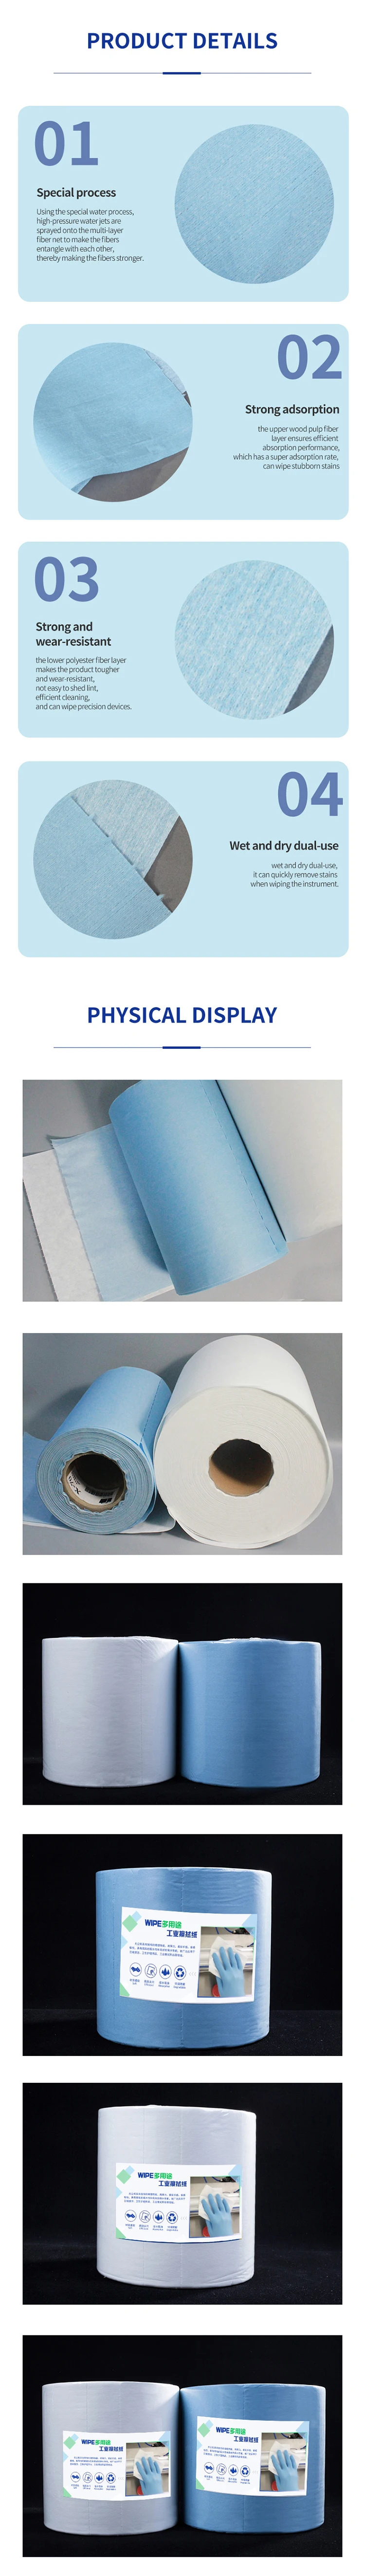 Nonwoven Cleaning Papers Manufacture Wipe And Wash In Oen Cloth Wipe Bit Solution Industrial Rolling Paper